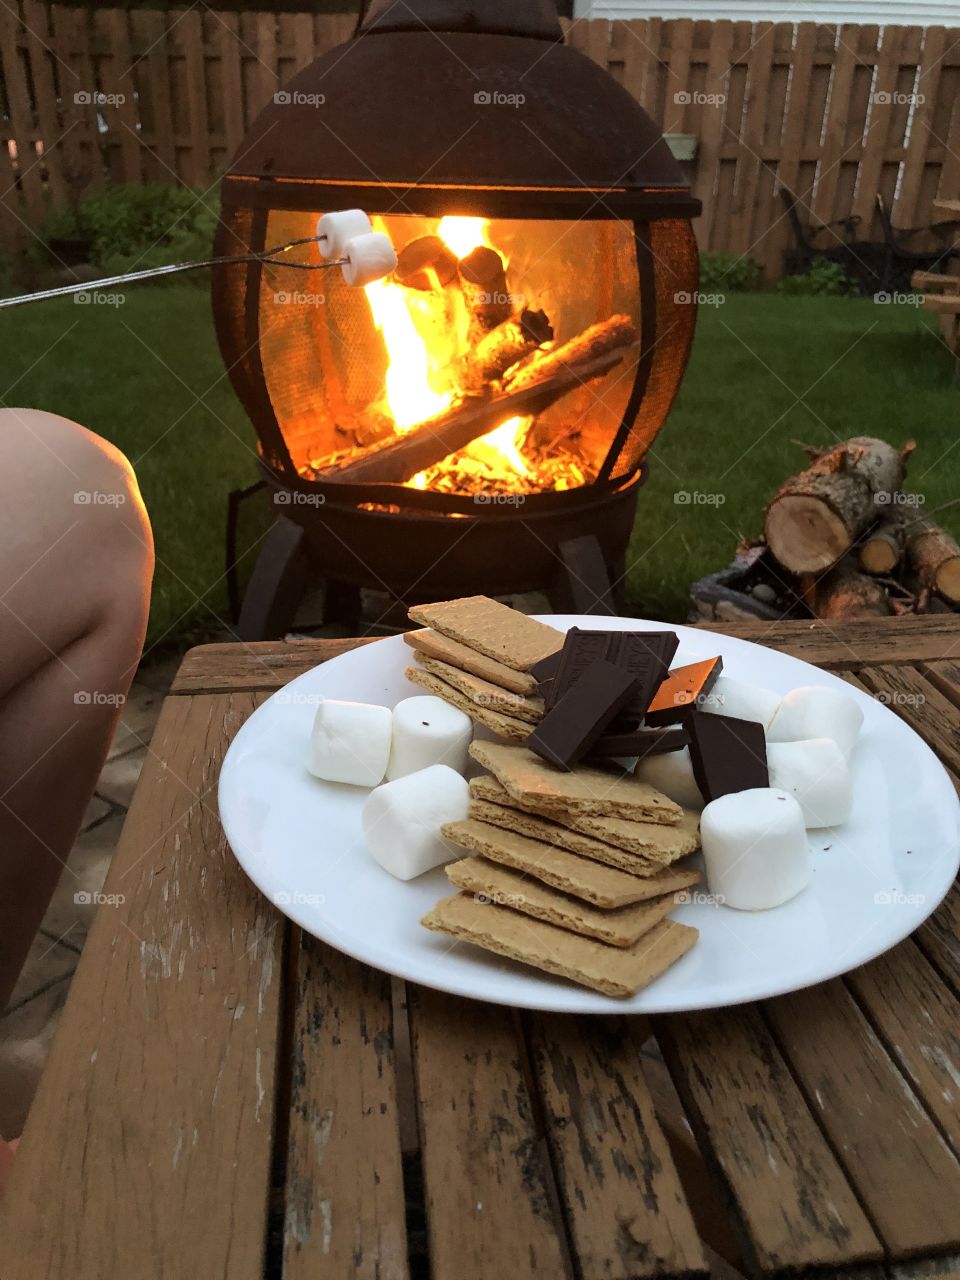 Backyard fire pit roasting marshmallows and making s’mores.